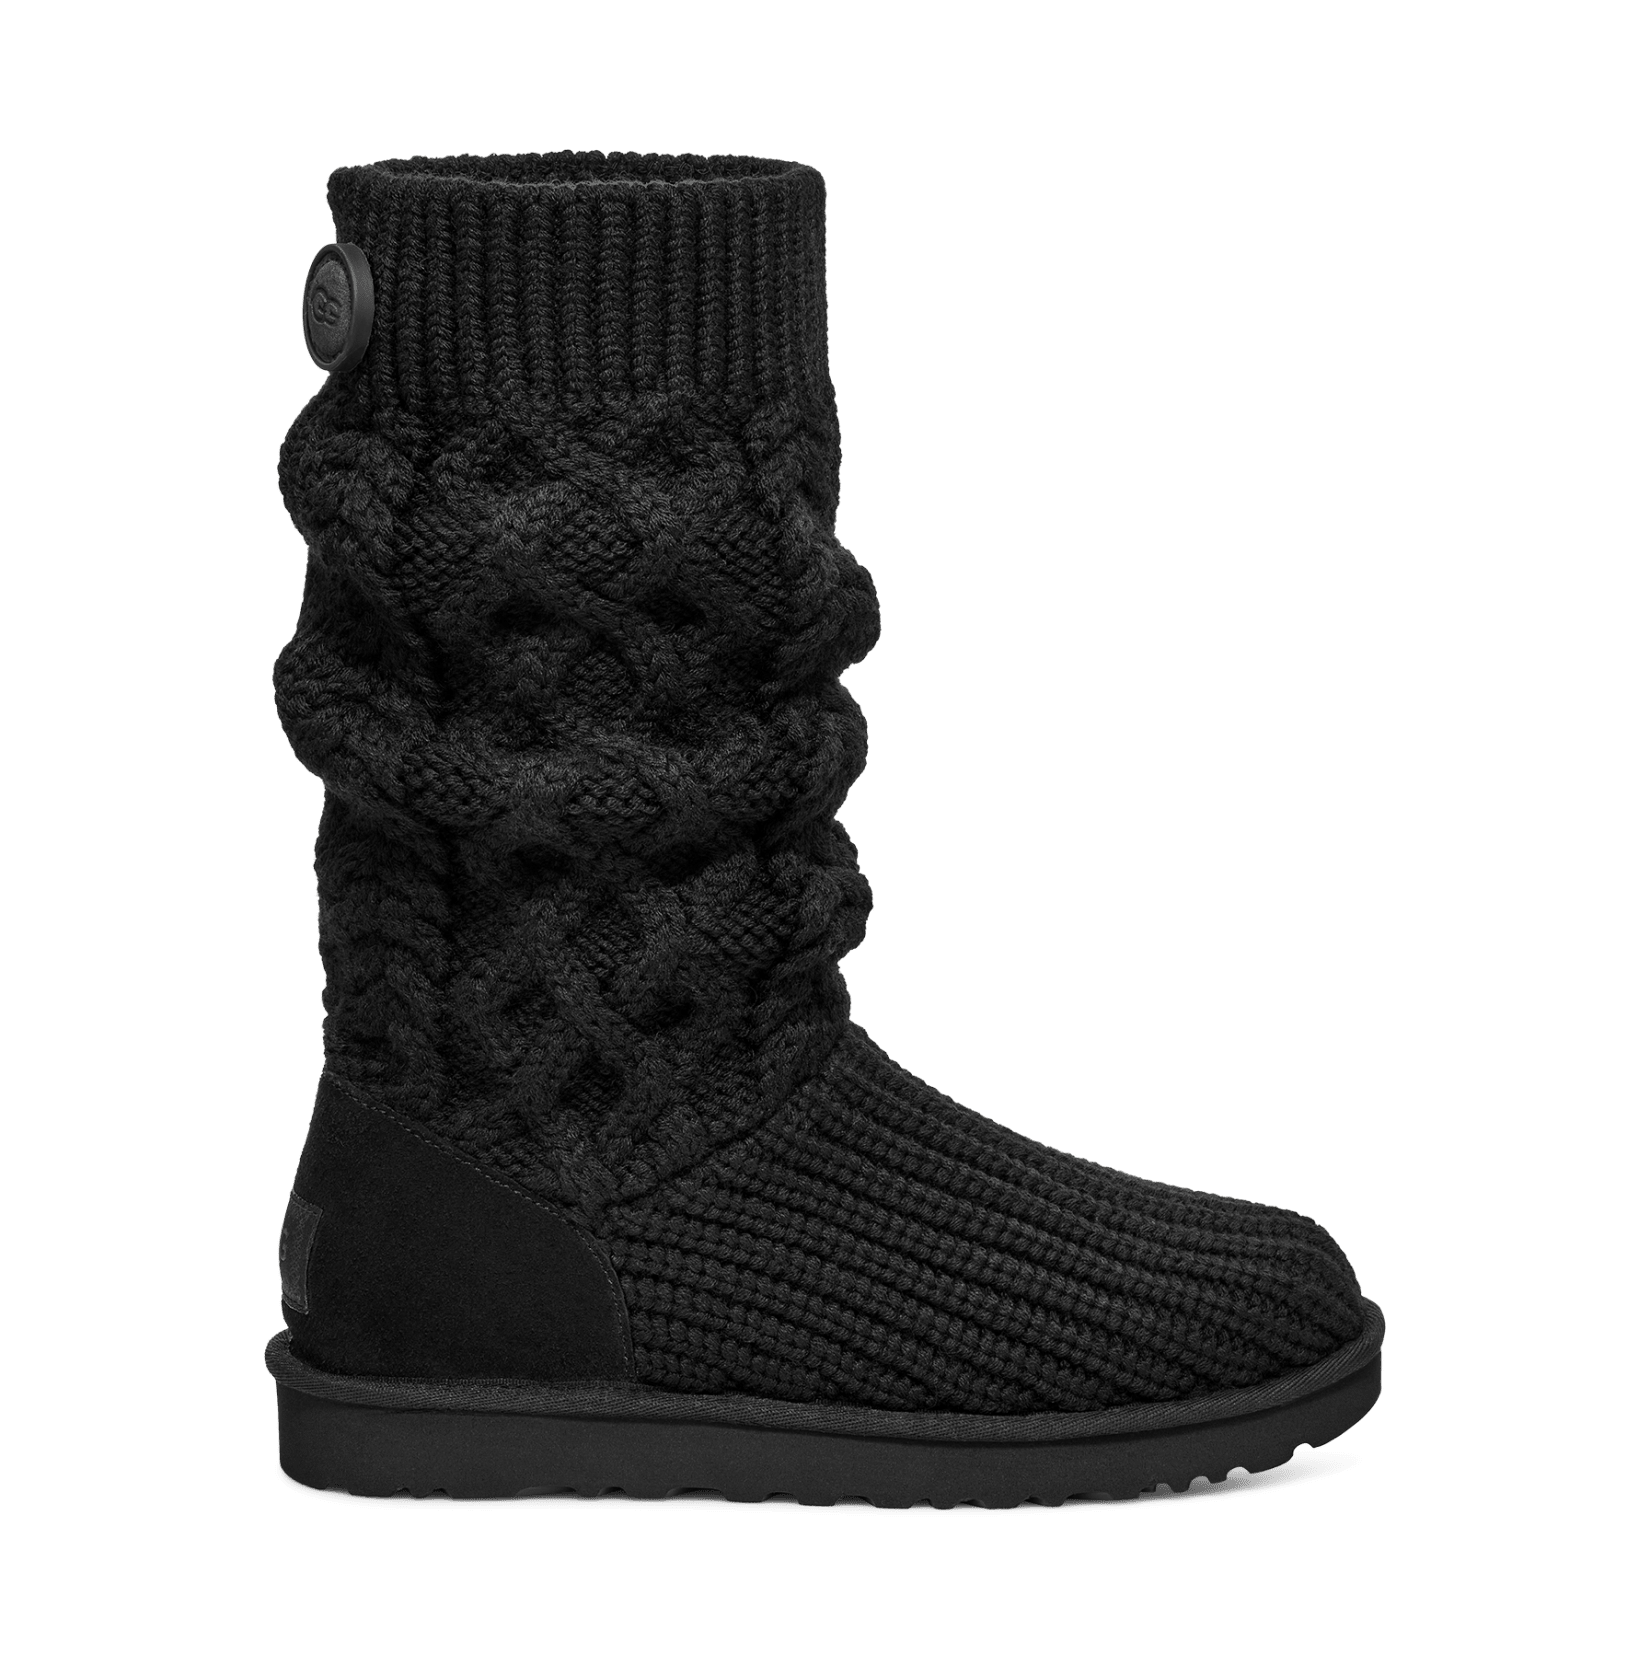 UGG Classic Cardi Cabled Knit Boot for Women | UGG® UK